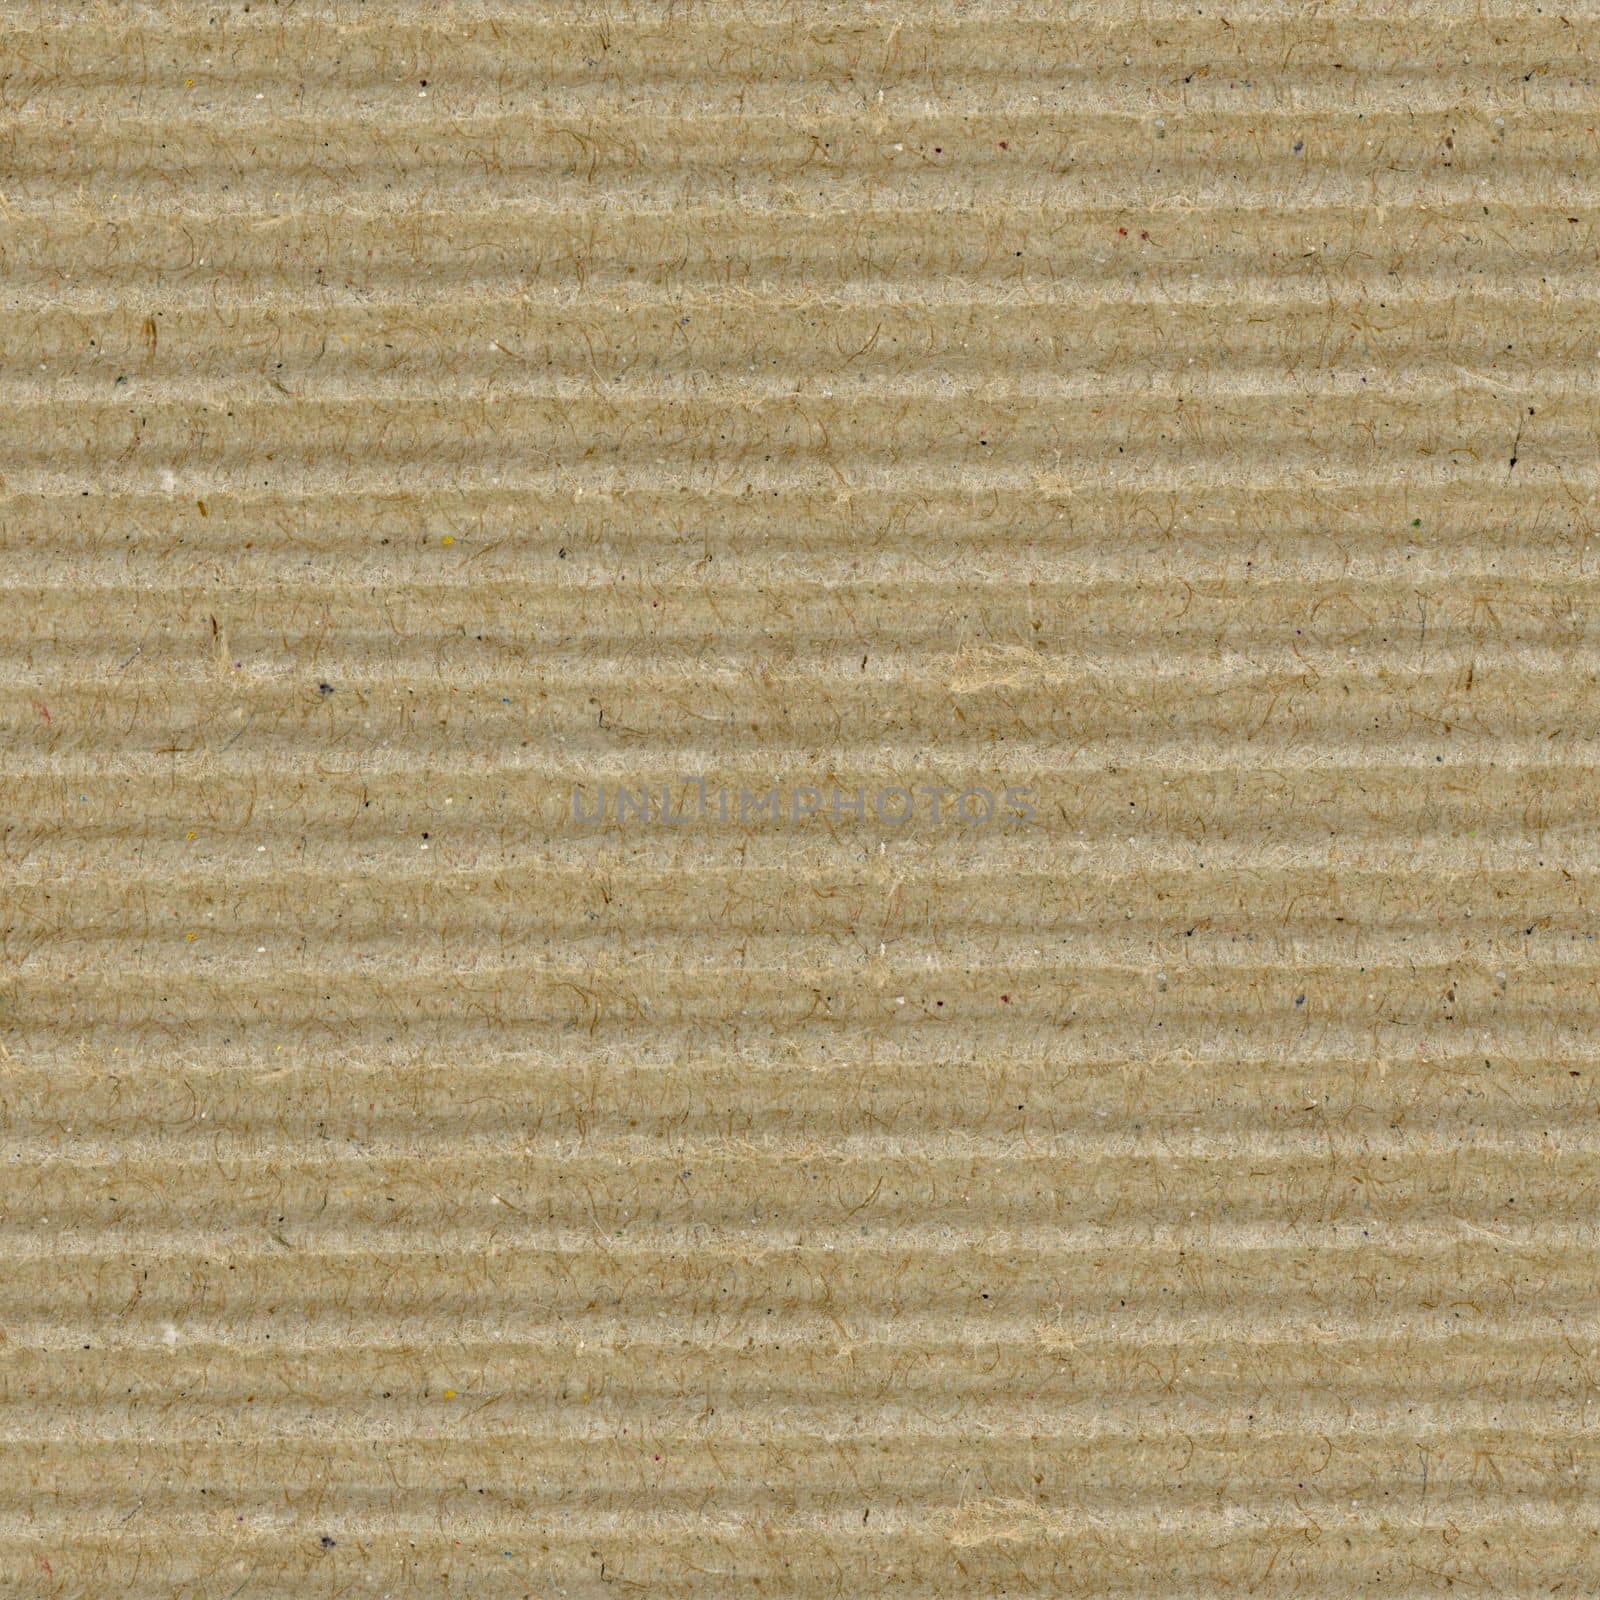 grunge brown corrugated cardboard texture useful as a background